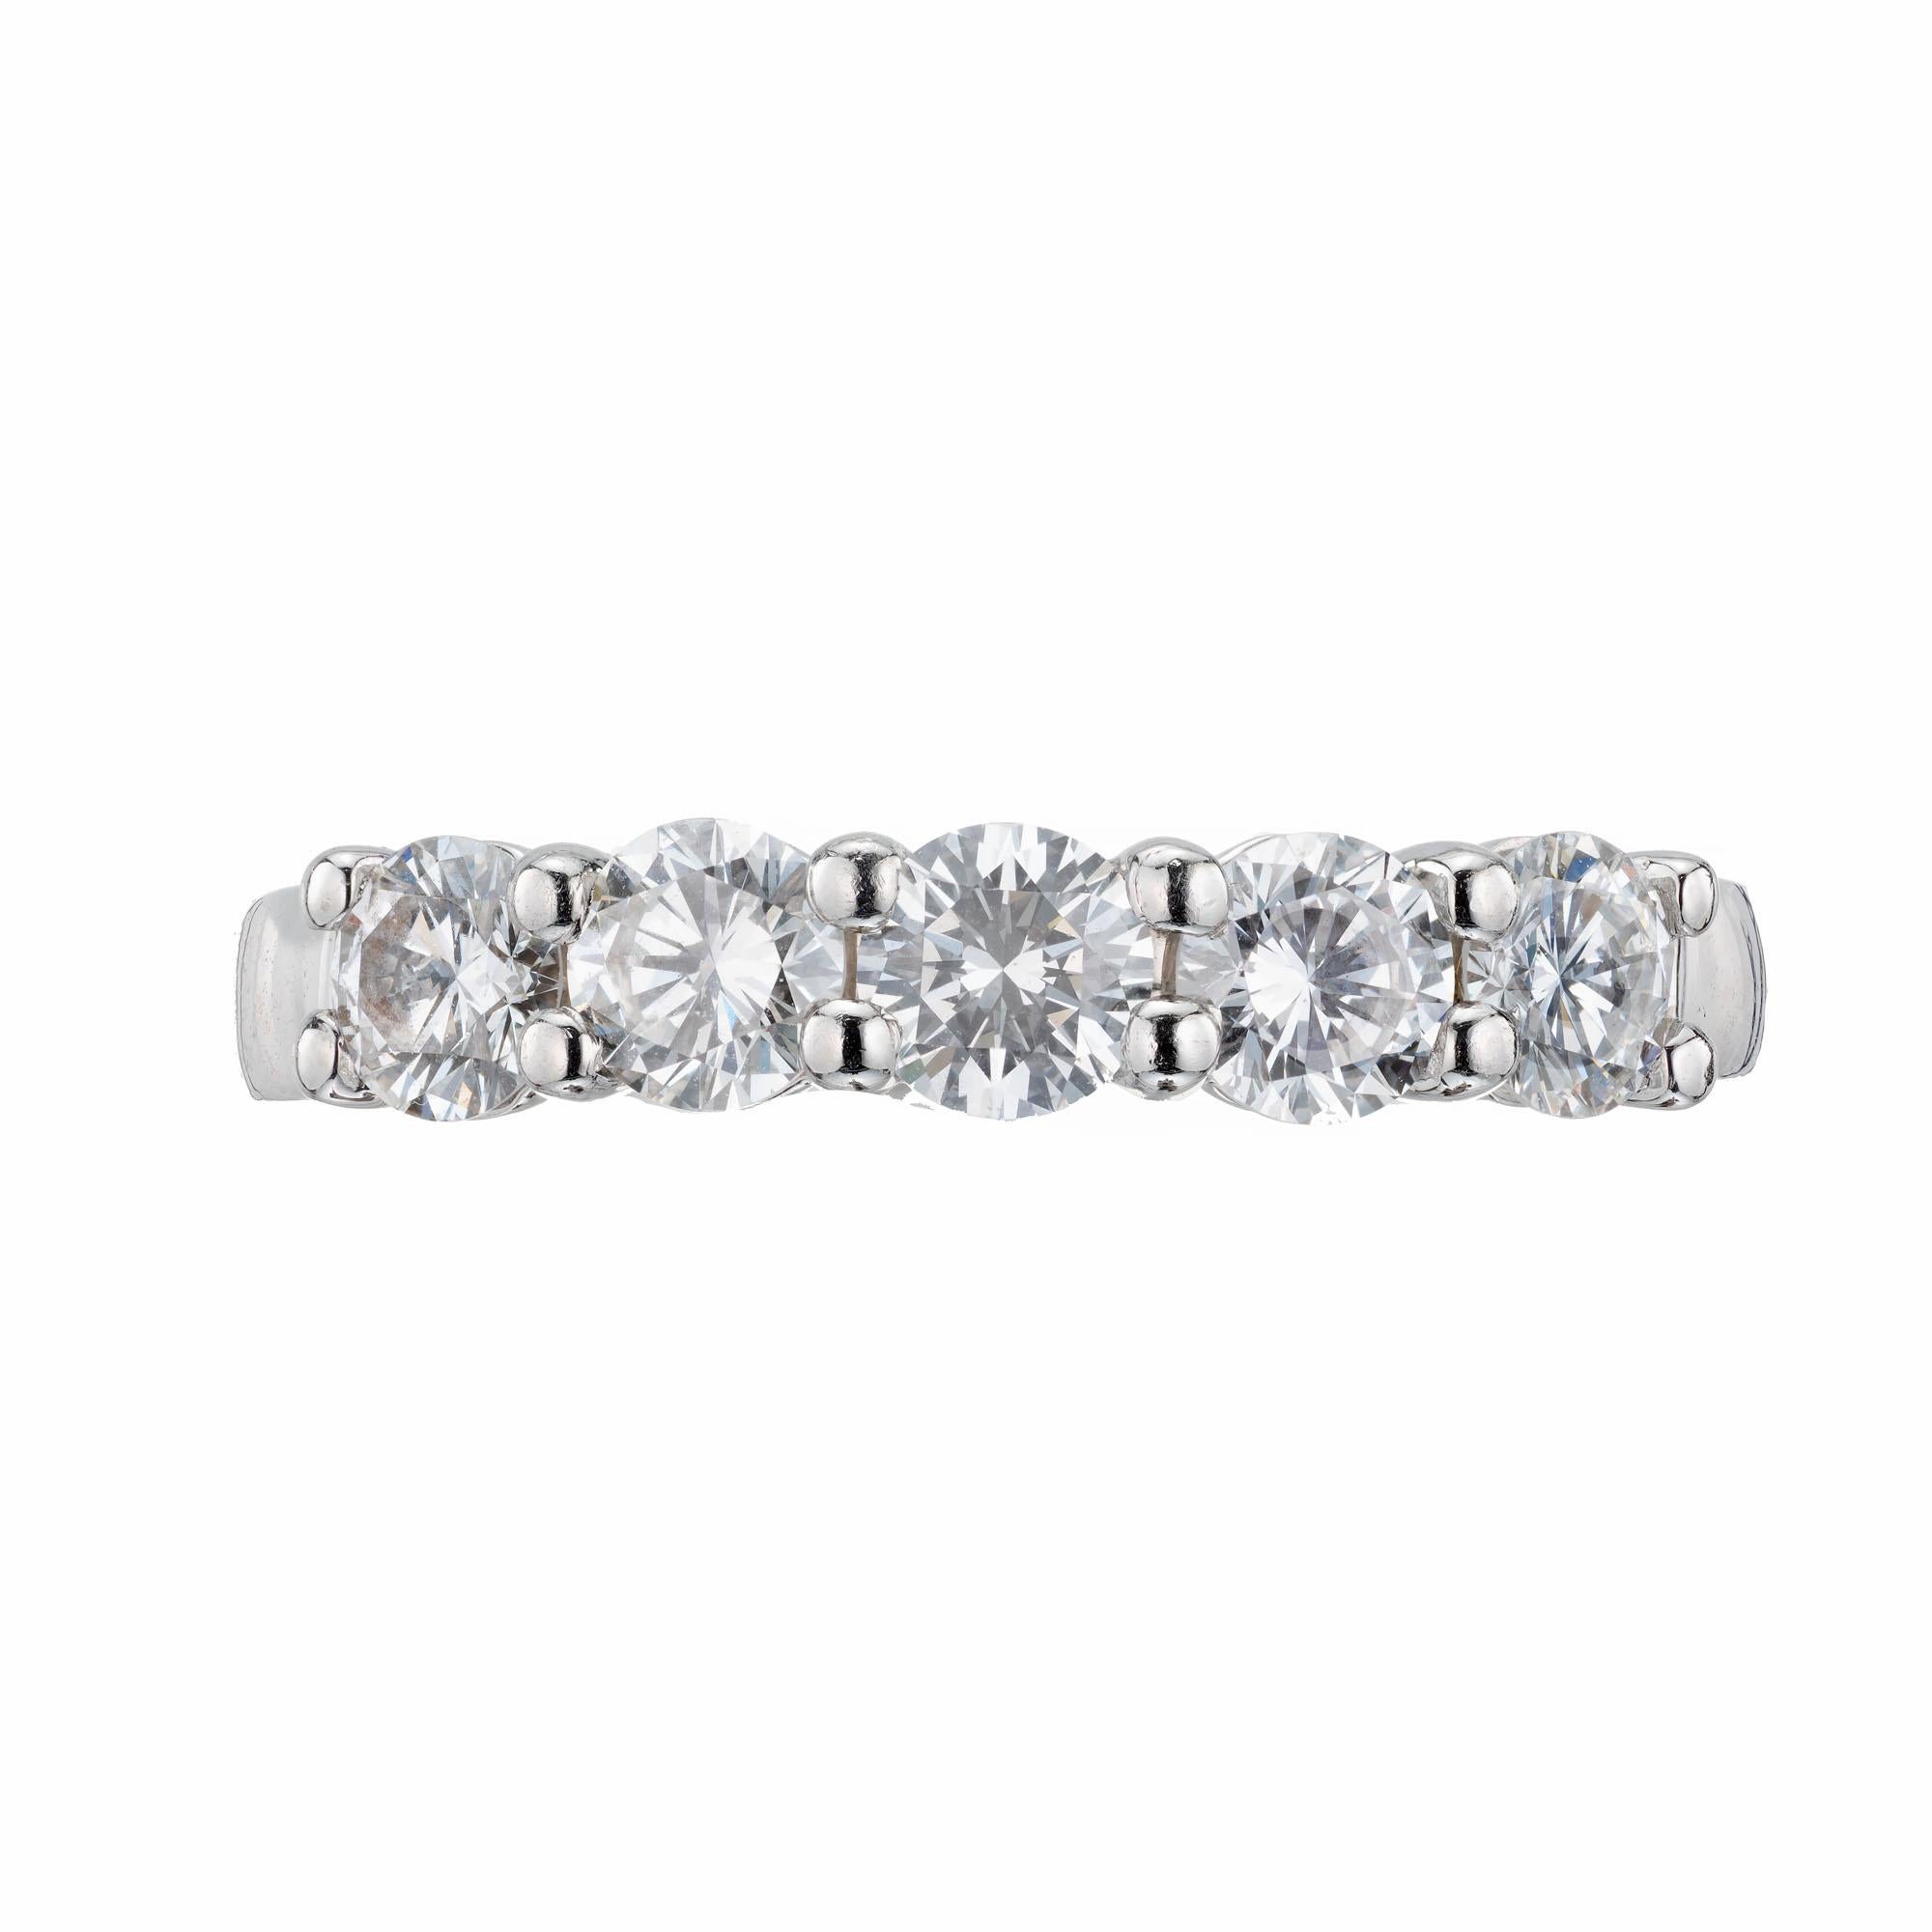  Low set common prong solid Platinum 1.00ct Diamond wedding band.

5 round brilliant cut Diamonds, approx. total weight 1.00cts, F – G, VS2 – SI1 
 Size 6 and sizable 
Platinum 
Tested: Platinum 
Stamped: Plat 
6.2 grams 
Width at top: 3.7mm
Height